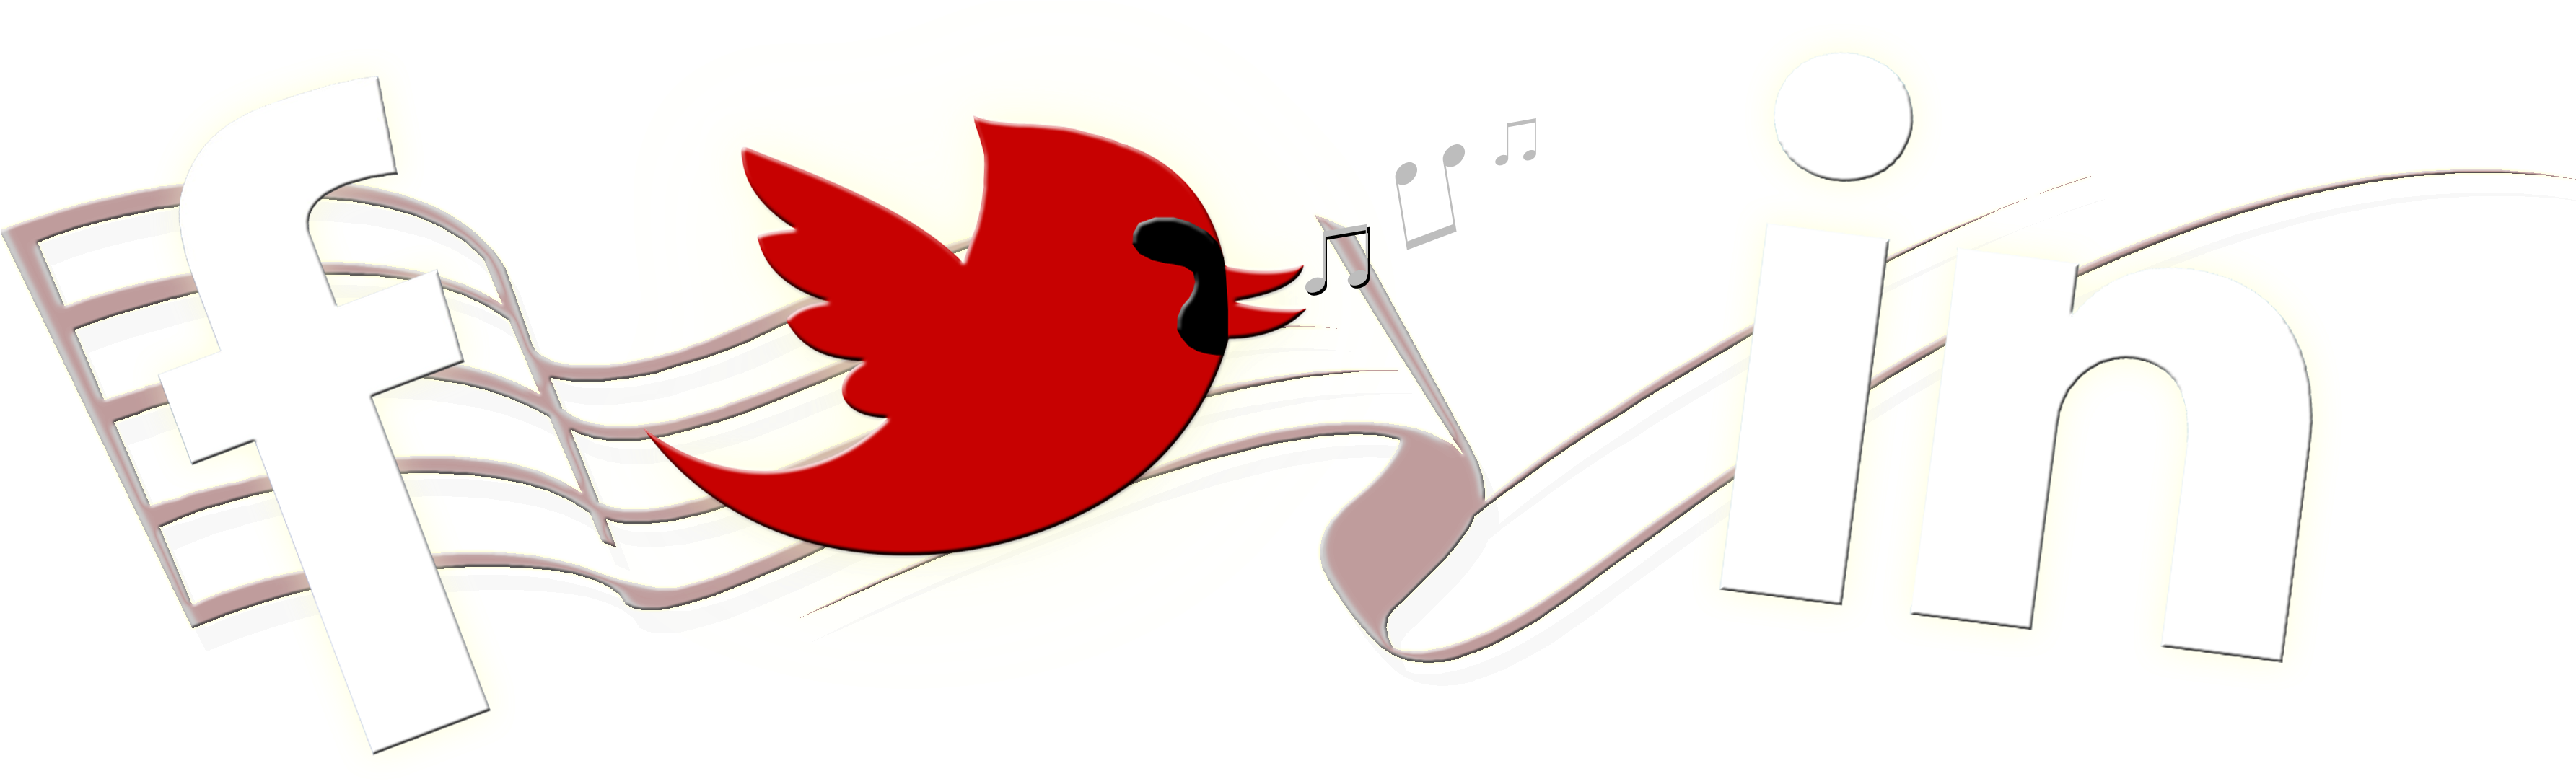 Drawing Cardinals Ink - Music Notes Clear Background (3569x1152)